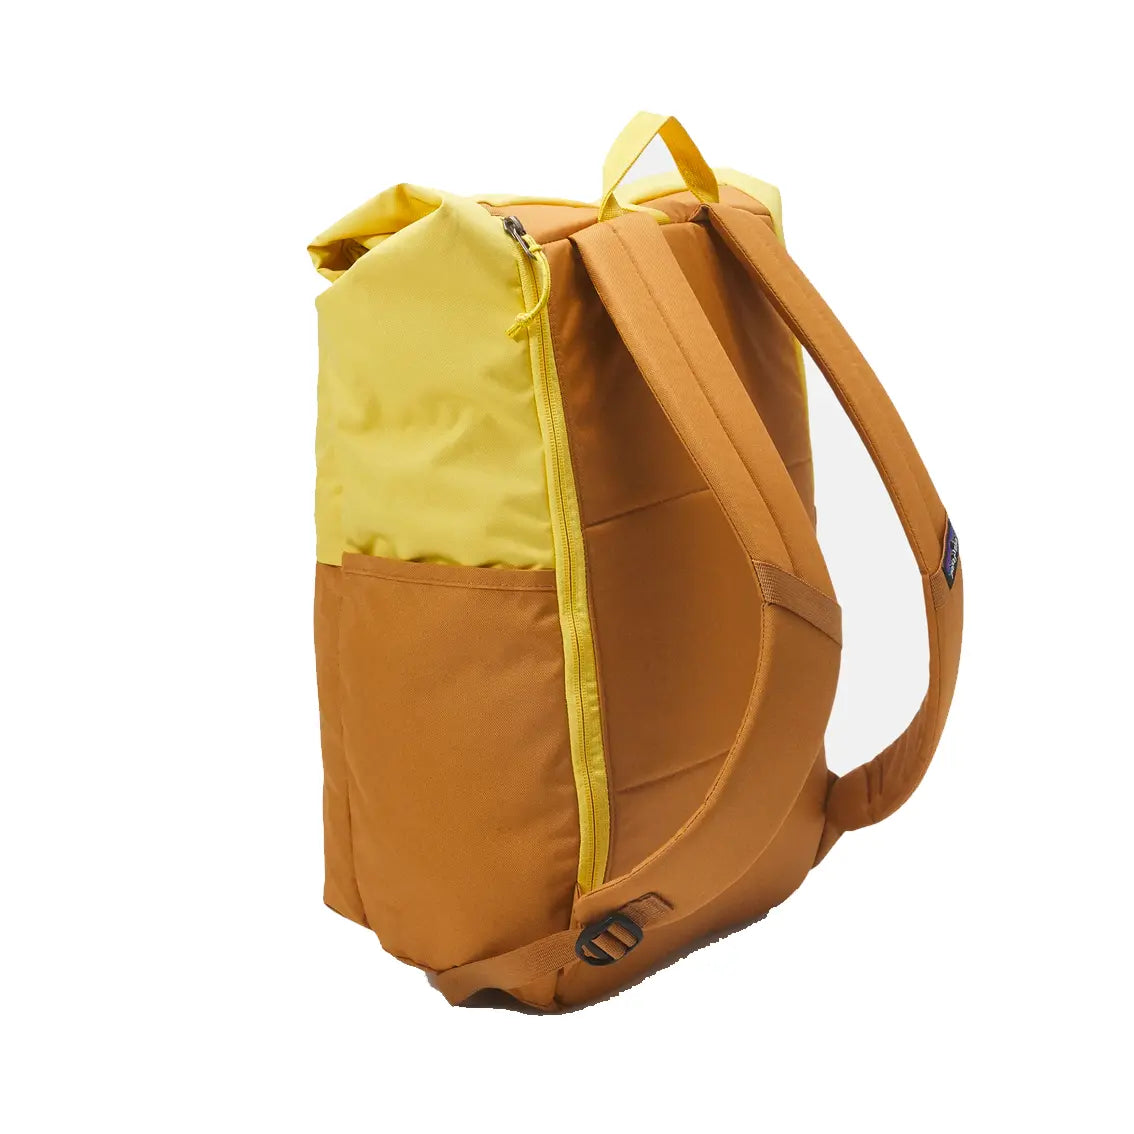 Patagonia Arbor Roll Top Pack - Surfboard Yellow